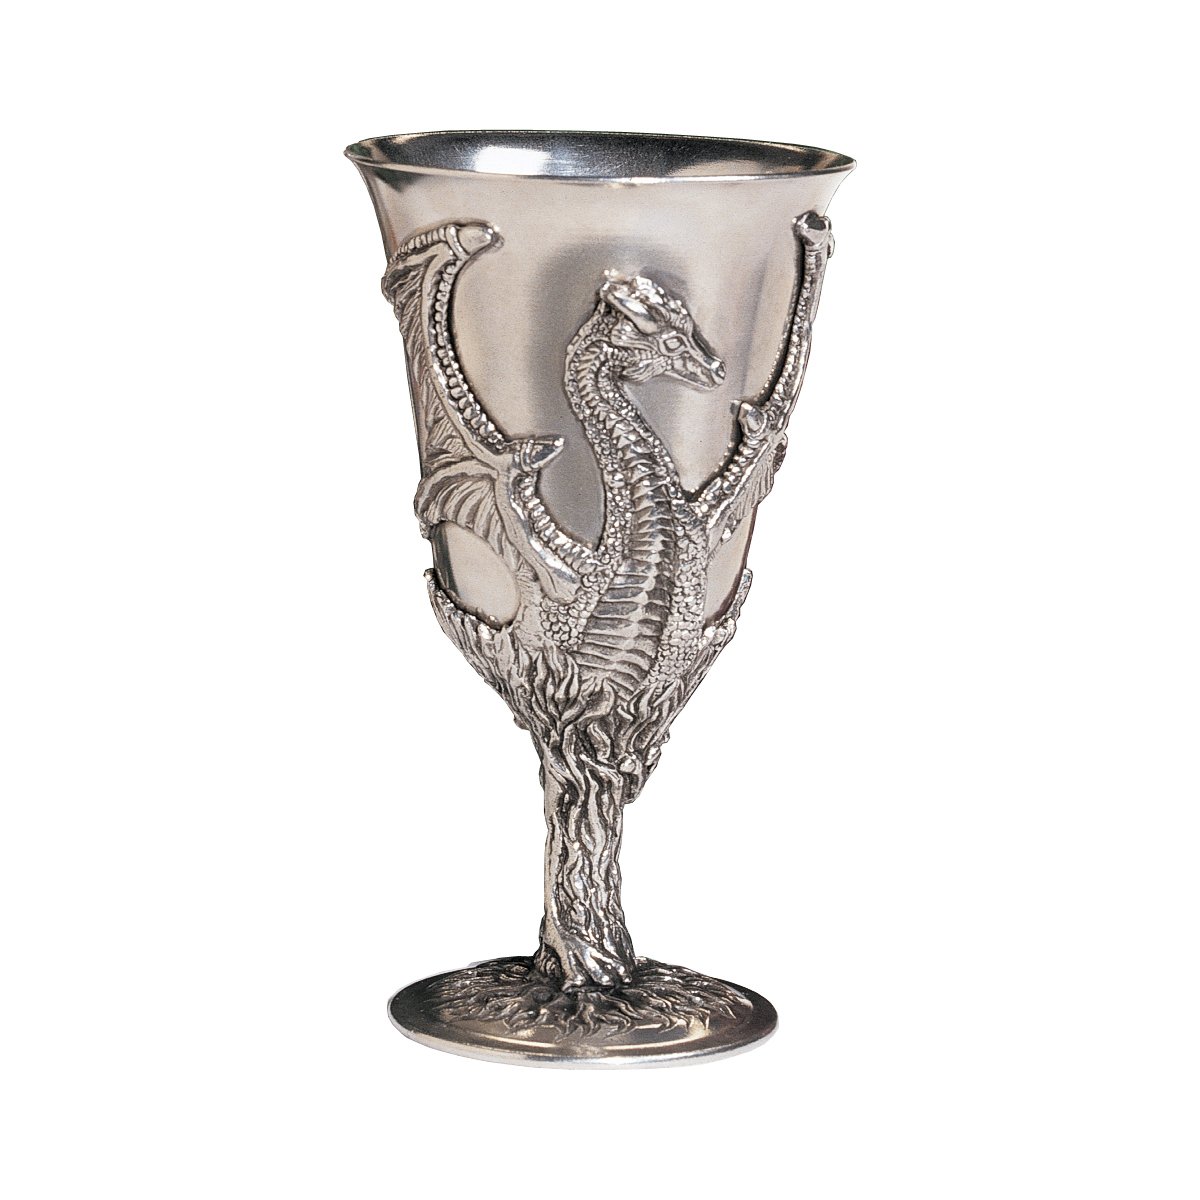 Design Toscano Dragon Pewter Goblet Cup, 6 Inch, Pewter,